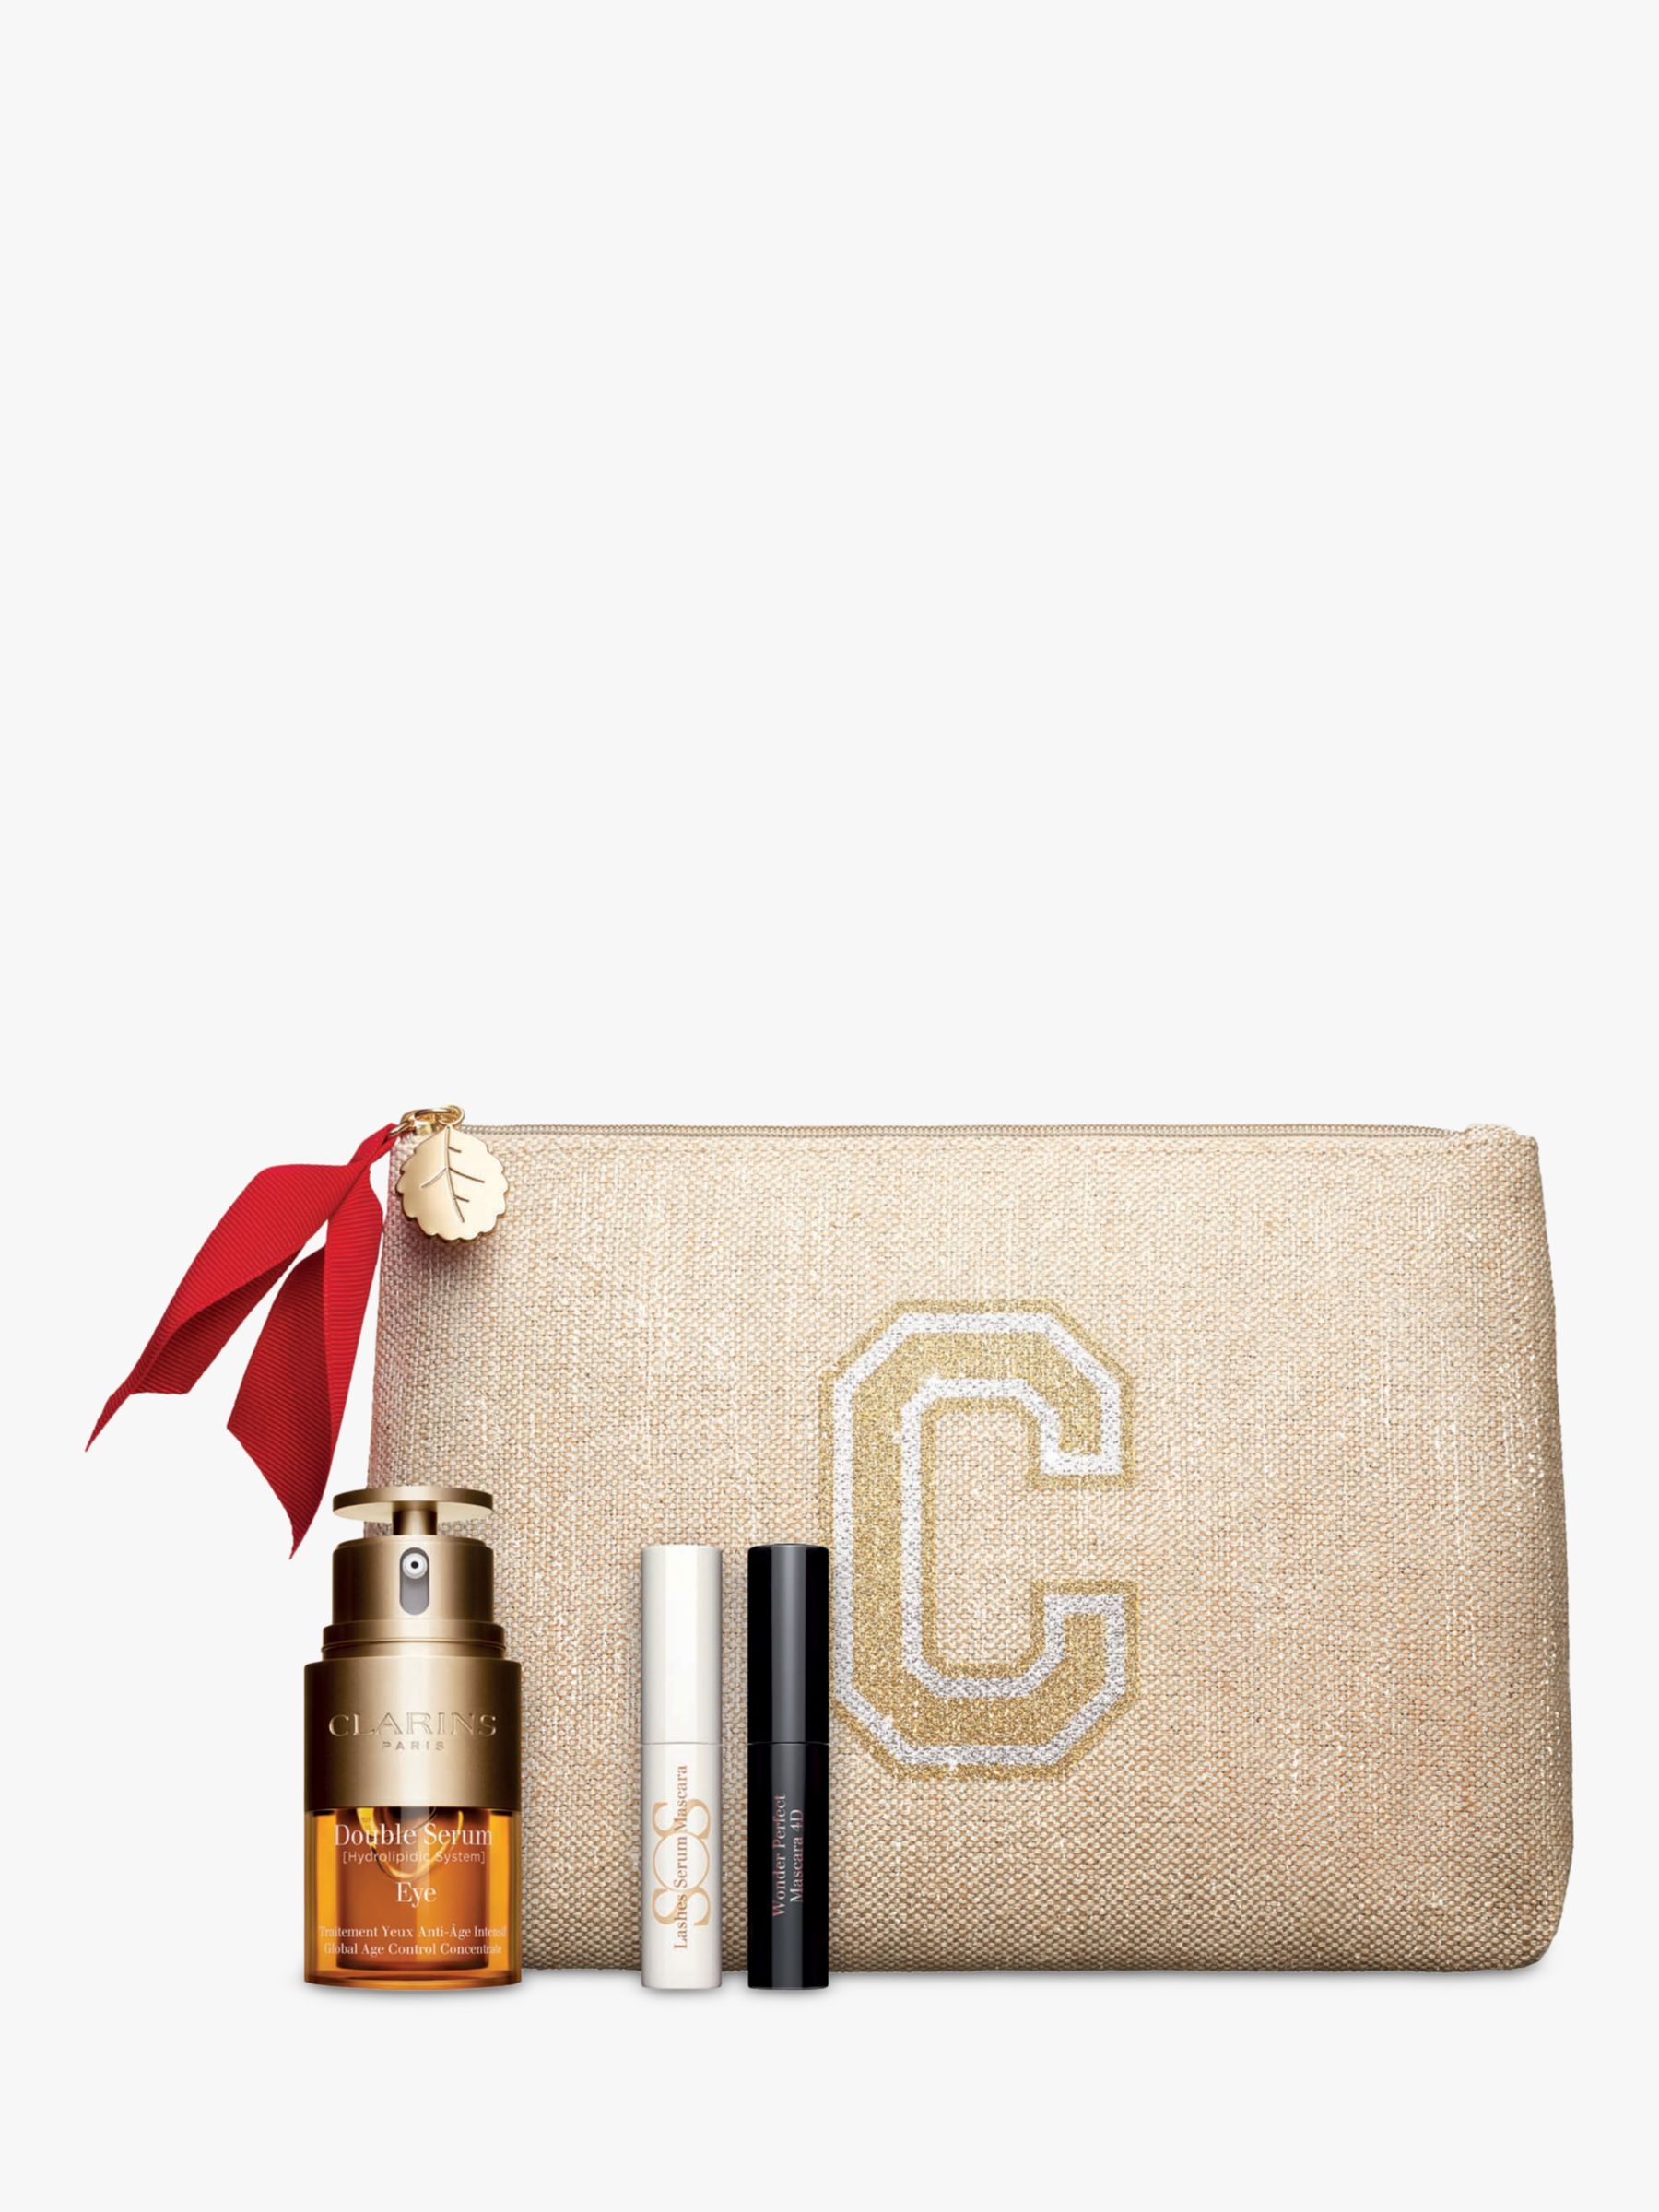 Clarins Double Serum Eye 20ml Collection Skincare Gift Set